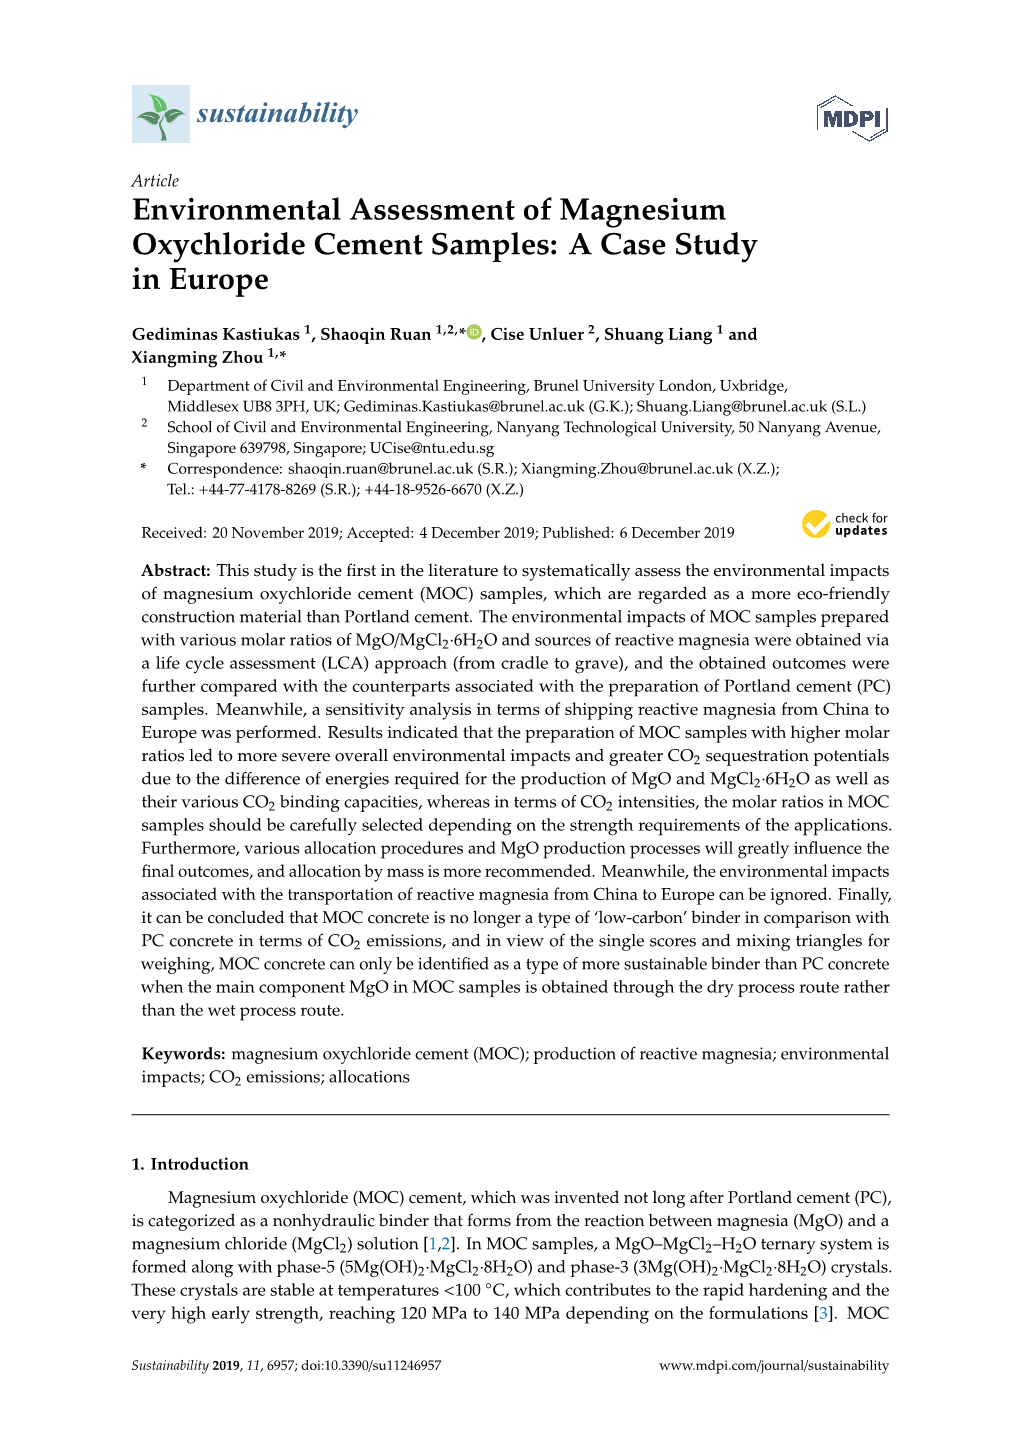 Environmental Assessment of Magnesium Oxychloride Cement Samples: a Case Study in Europe